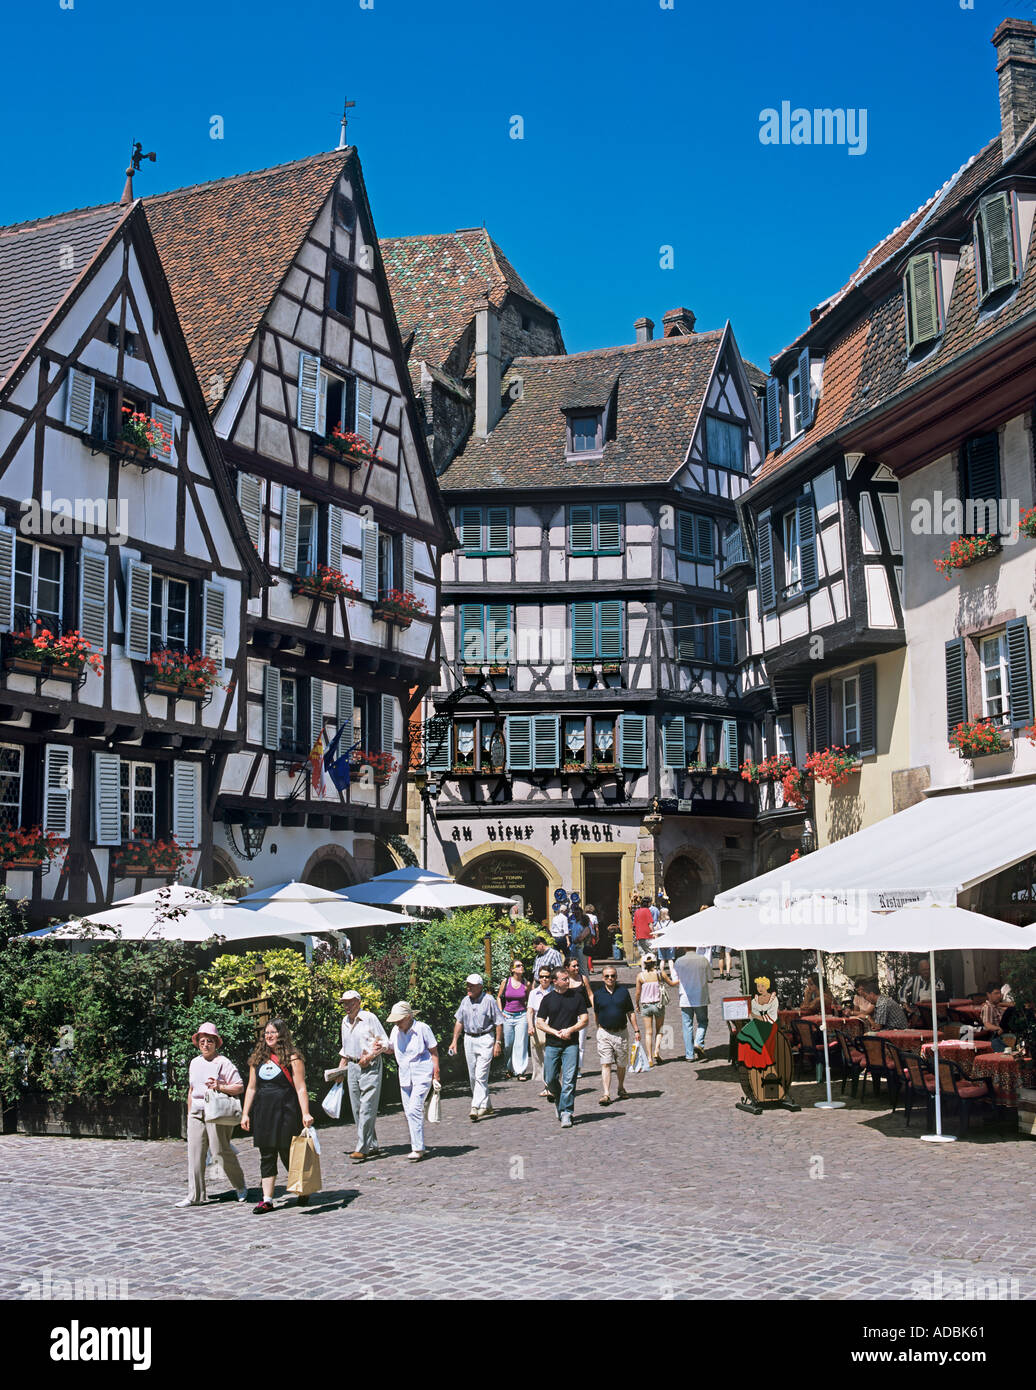 Old timber framed buildings in the town centre of Colmar, France. Stock Photo